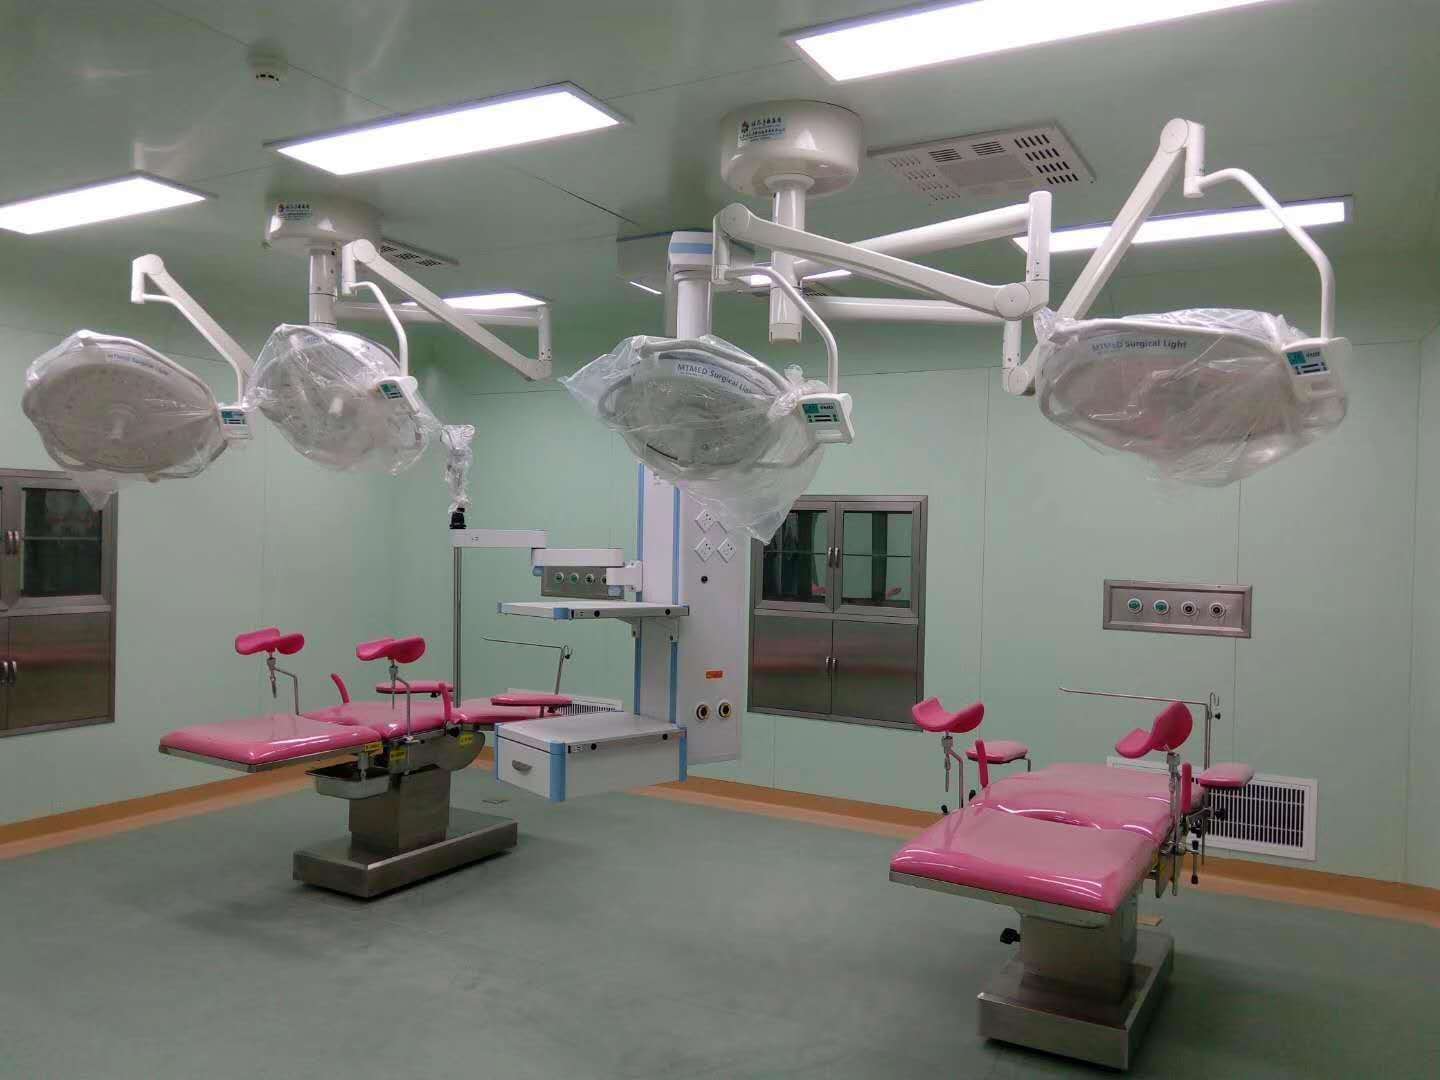 Liaoning clean operating room is of high quality